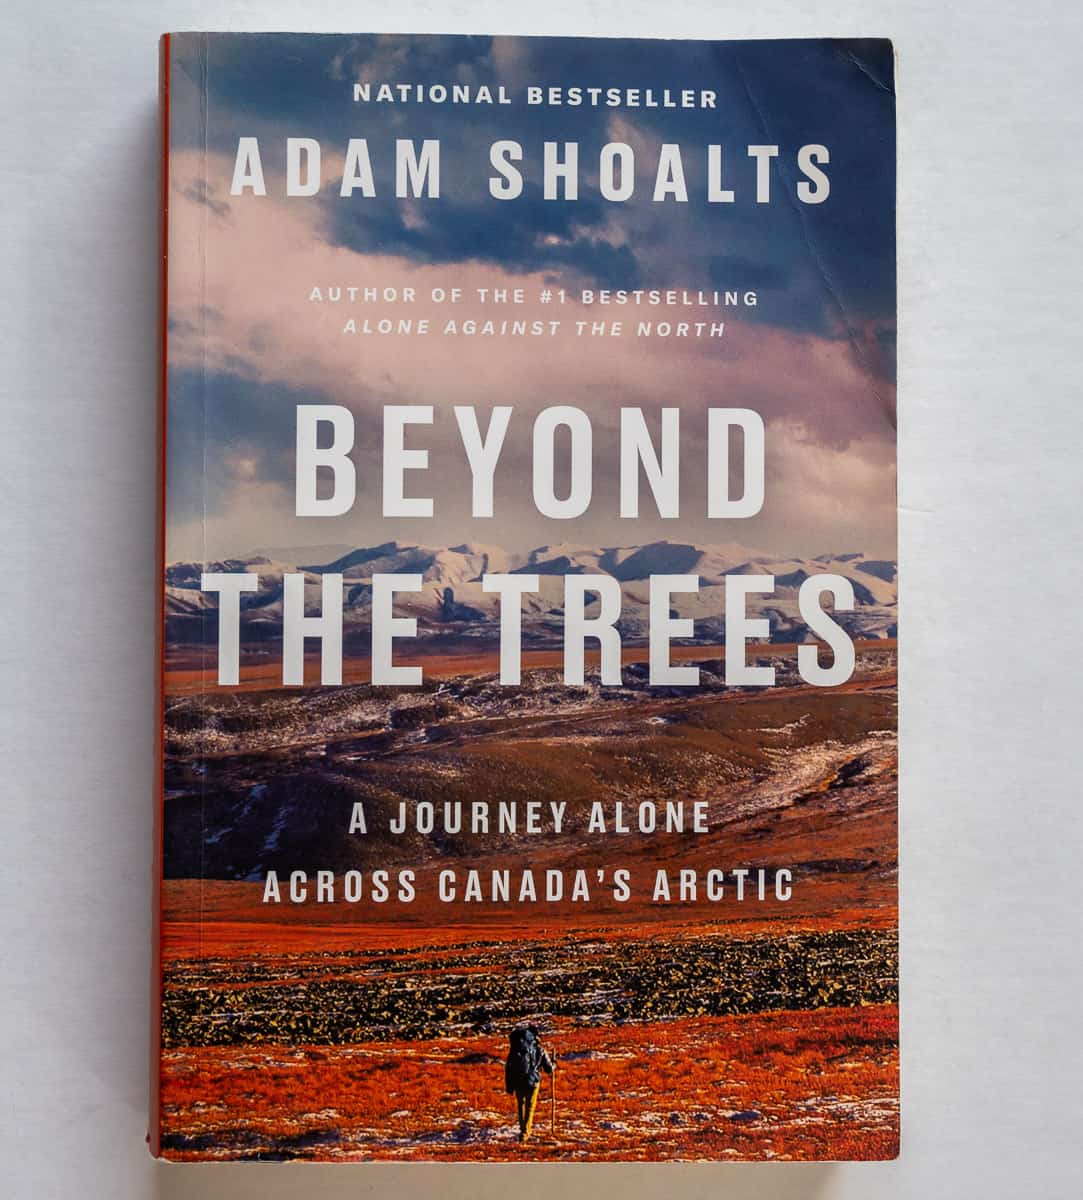 Beyond the Trees: A Journey Alone Across Canada's Arctic by Adam Shoalts